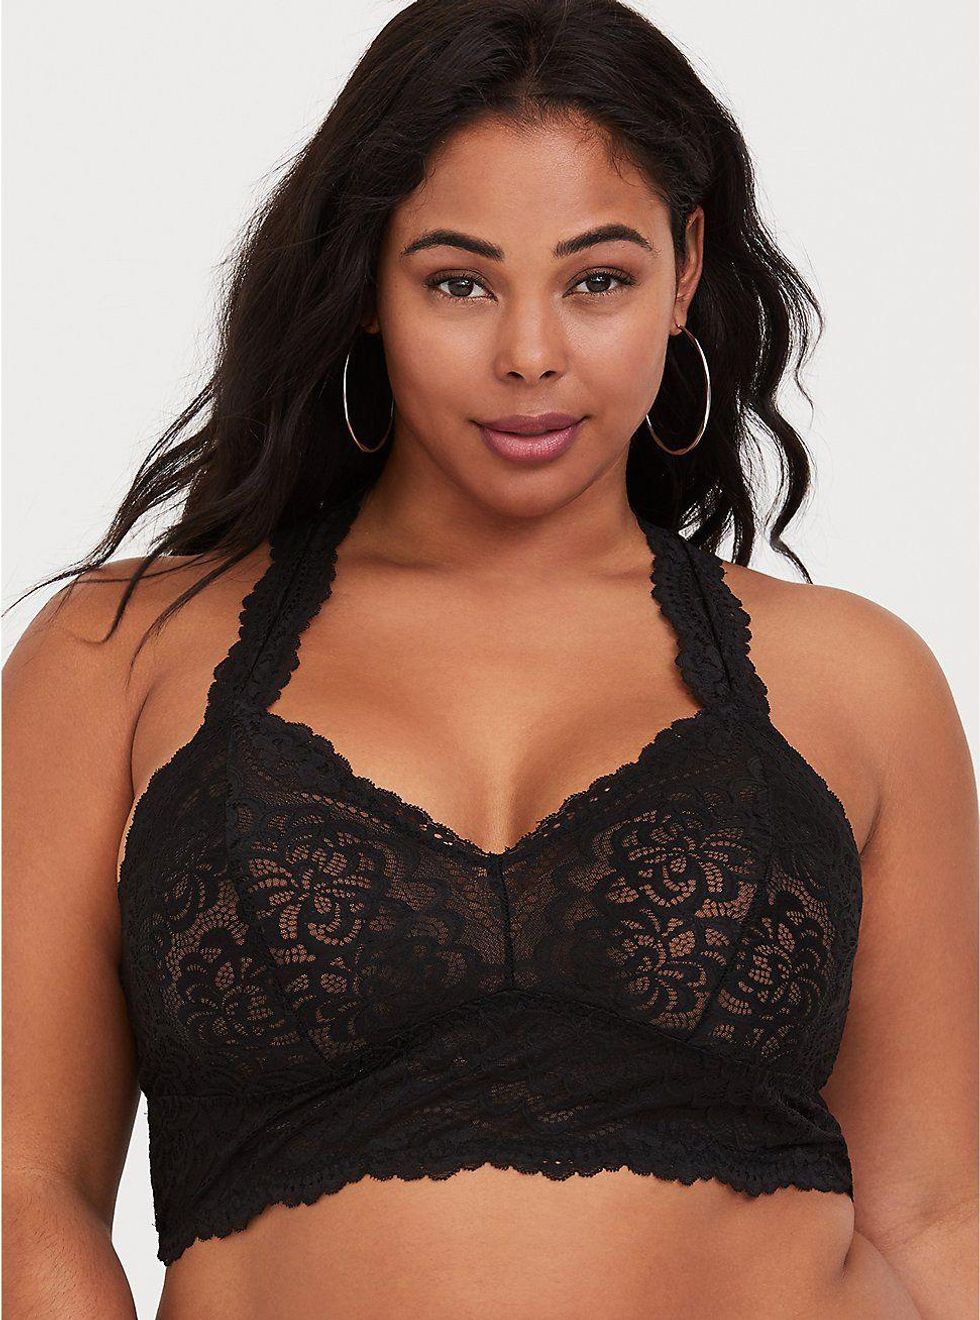 GATXVG Plus Size Bras for Big Busted Women No Underwire Front